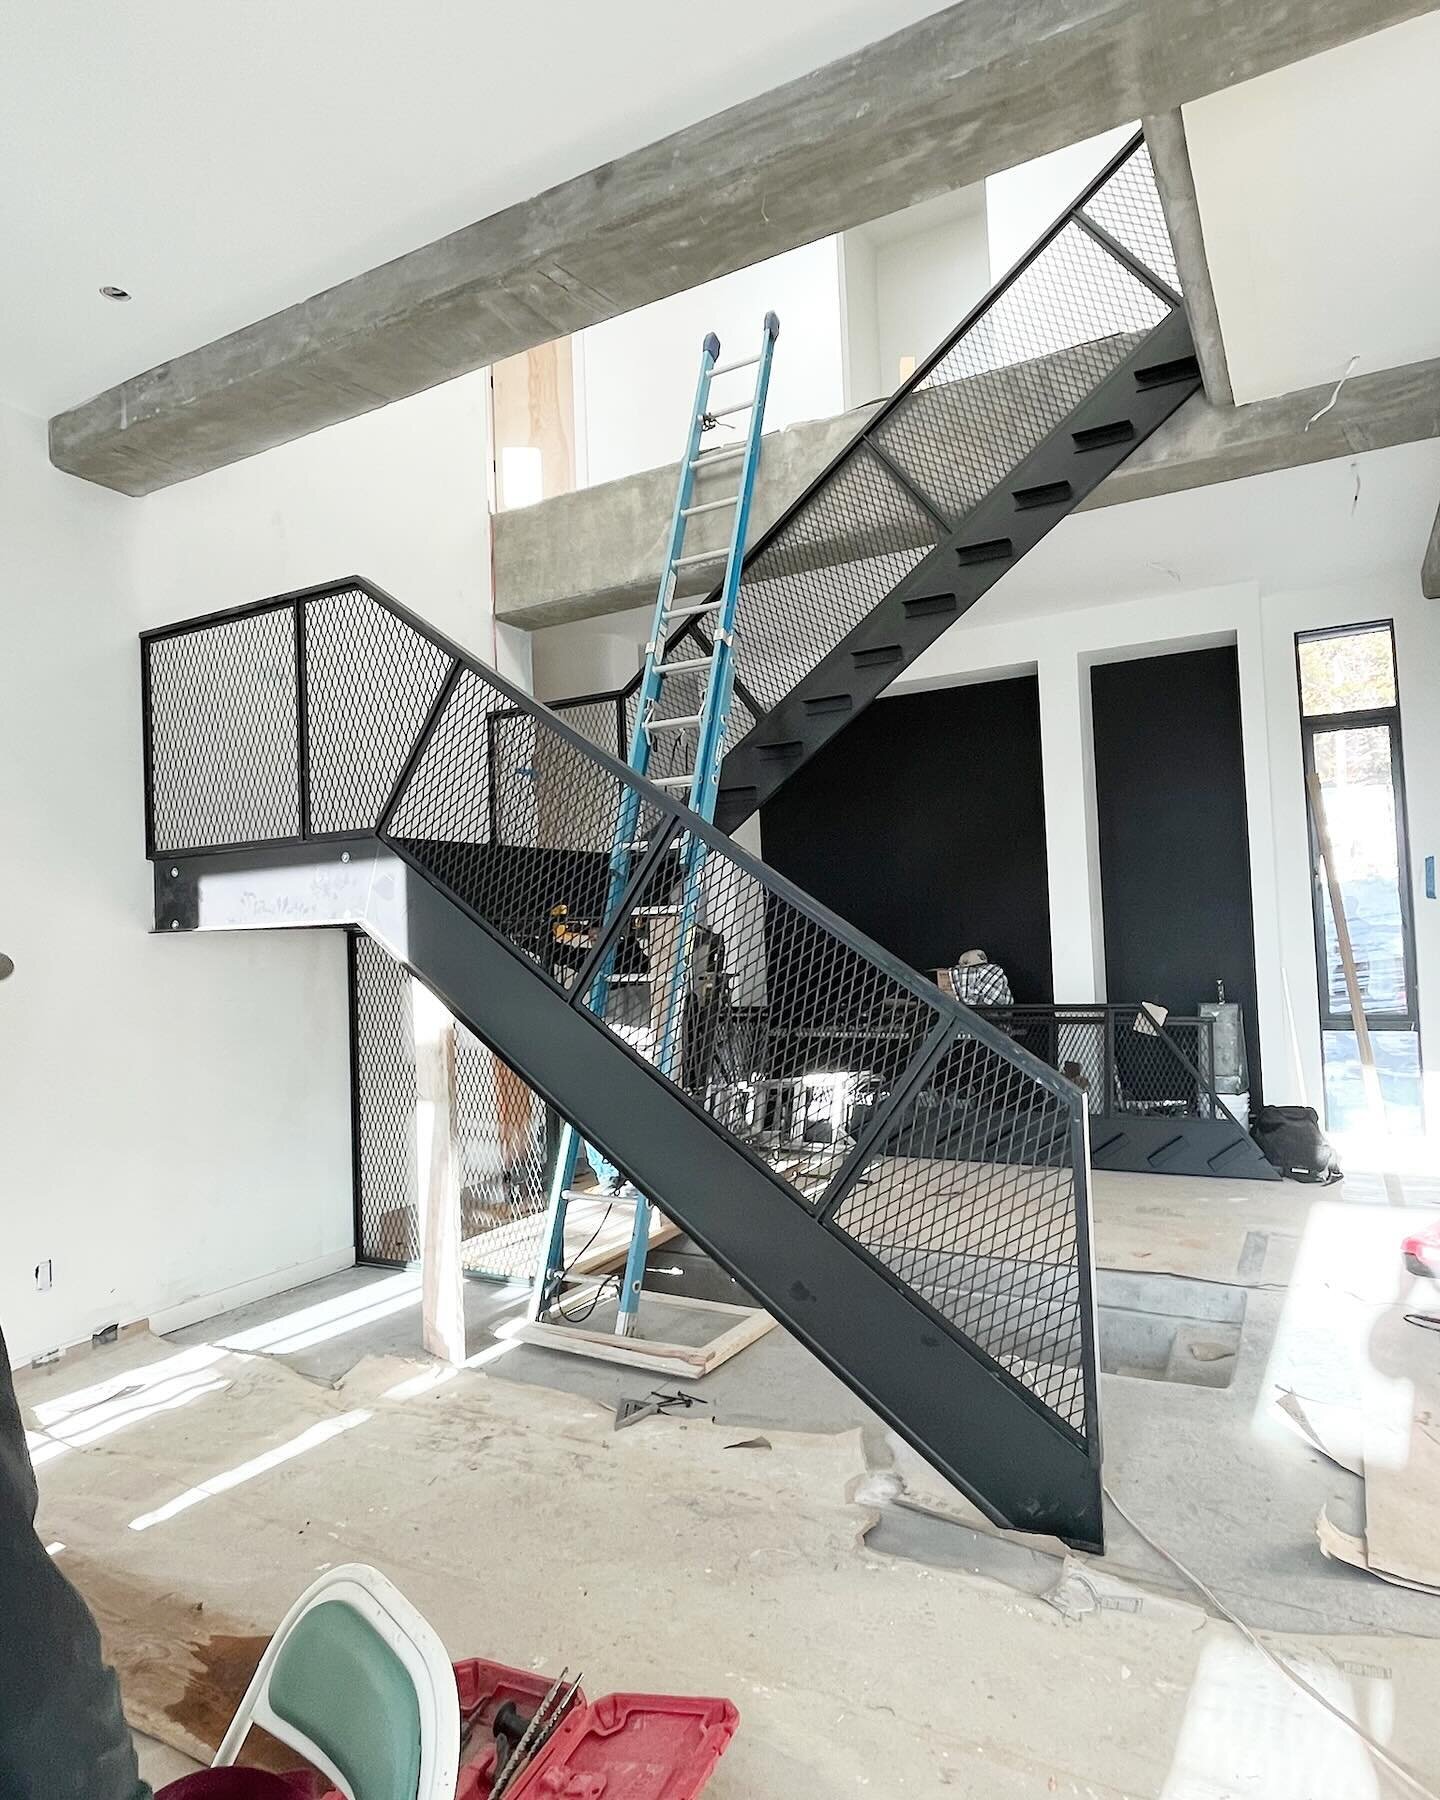 Setting our custom tig welded and powder coated stair system this week up in Blackhawk! 

#build3 #construction #customhome #architecture #design #designbuild #blackhawk  #mountainbuilder#denverhomebuilder #coloradoliving